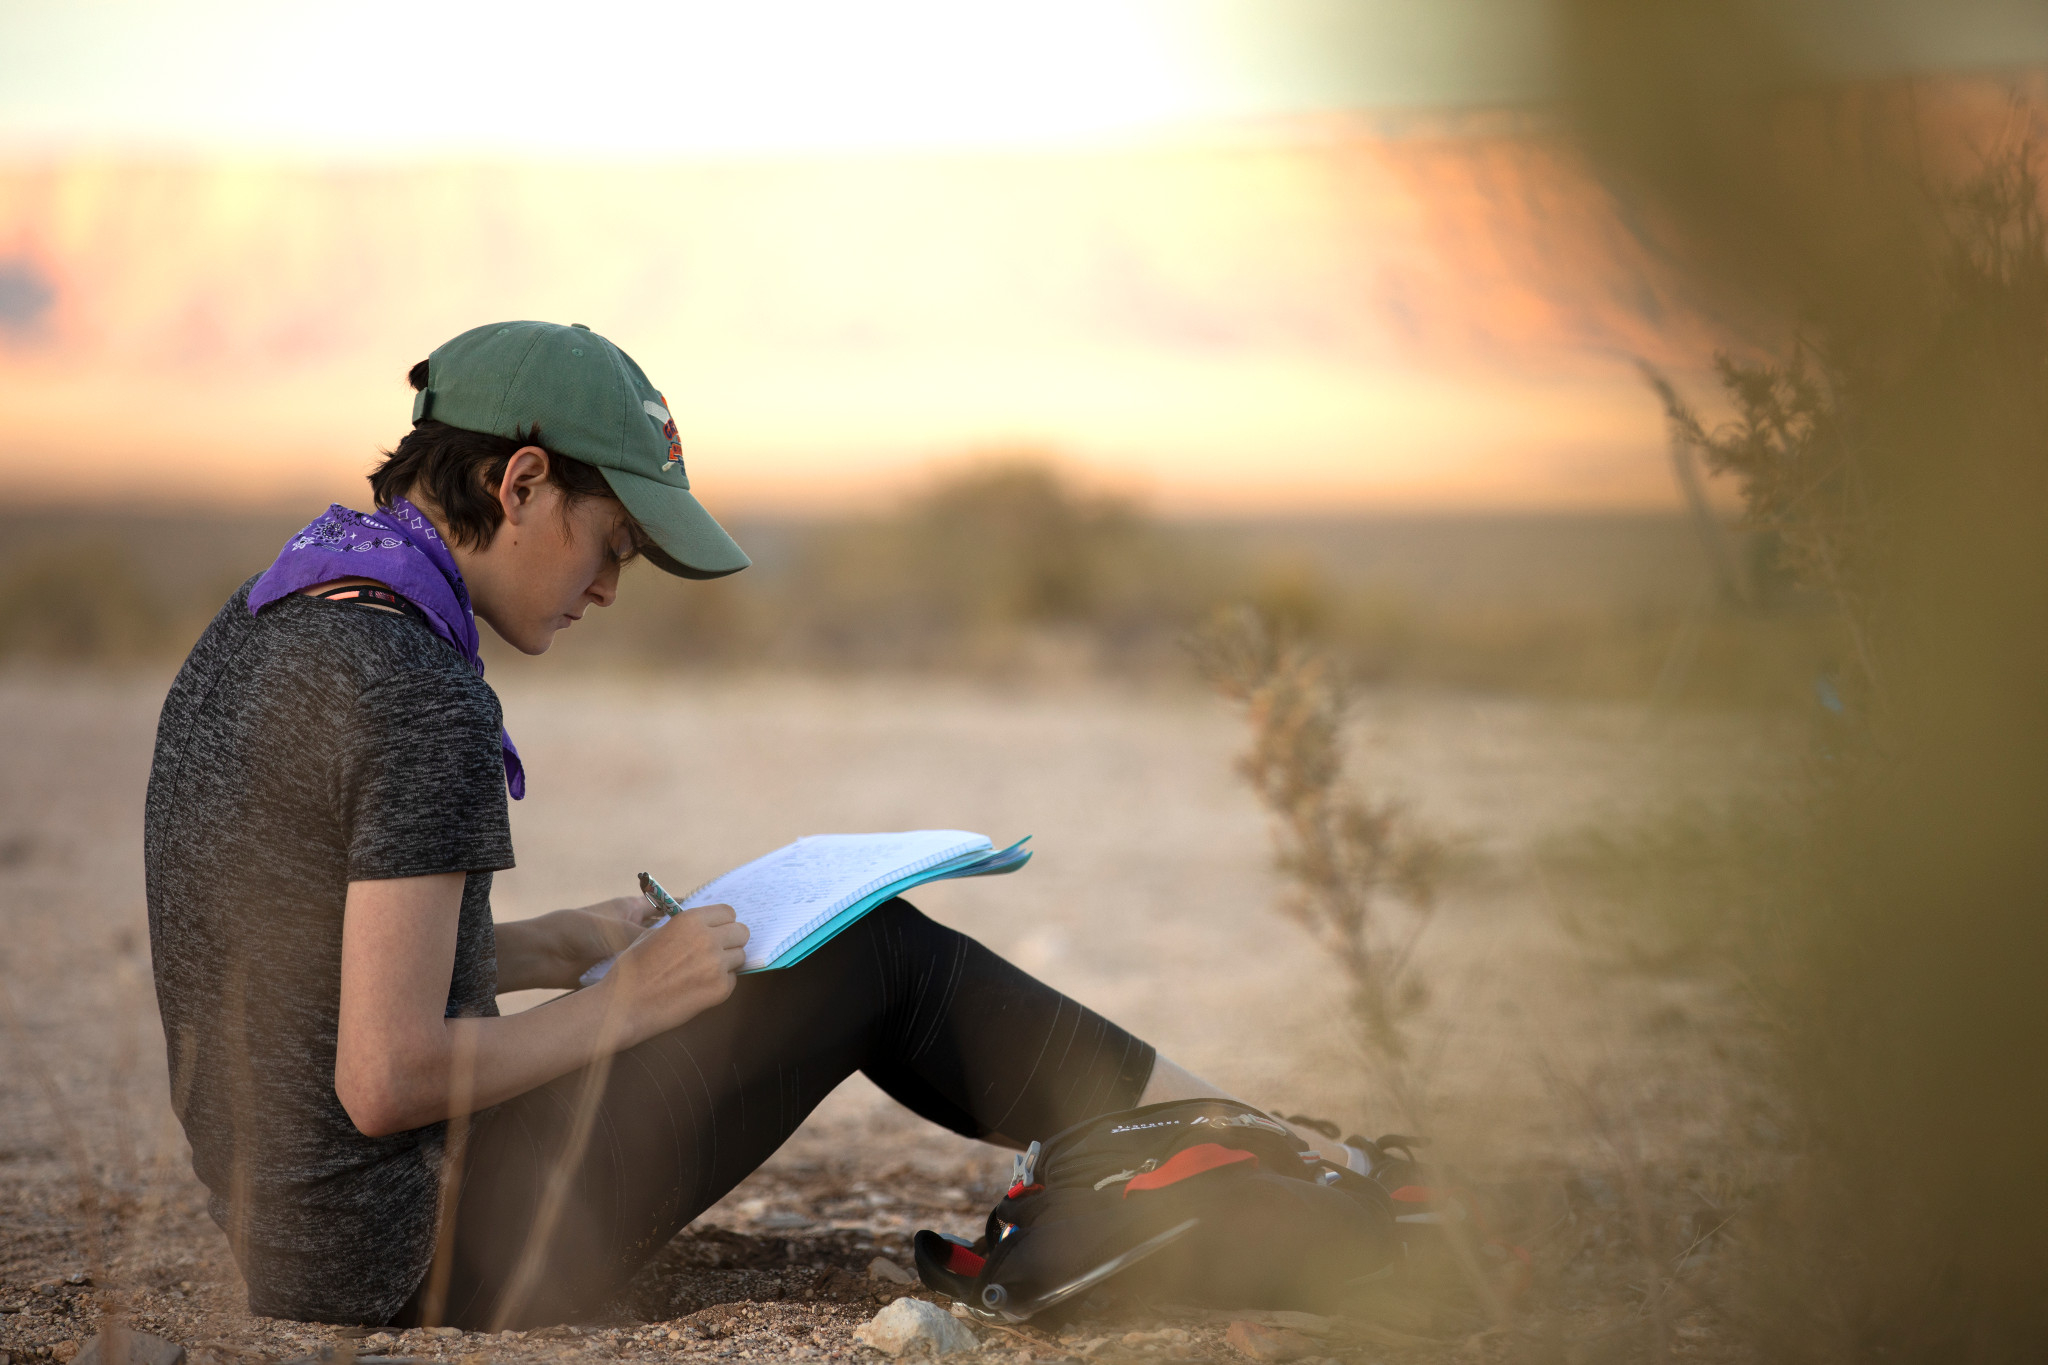 Student writes in a journal while sitting on the ground